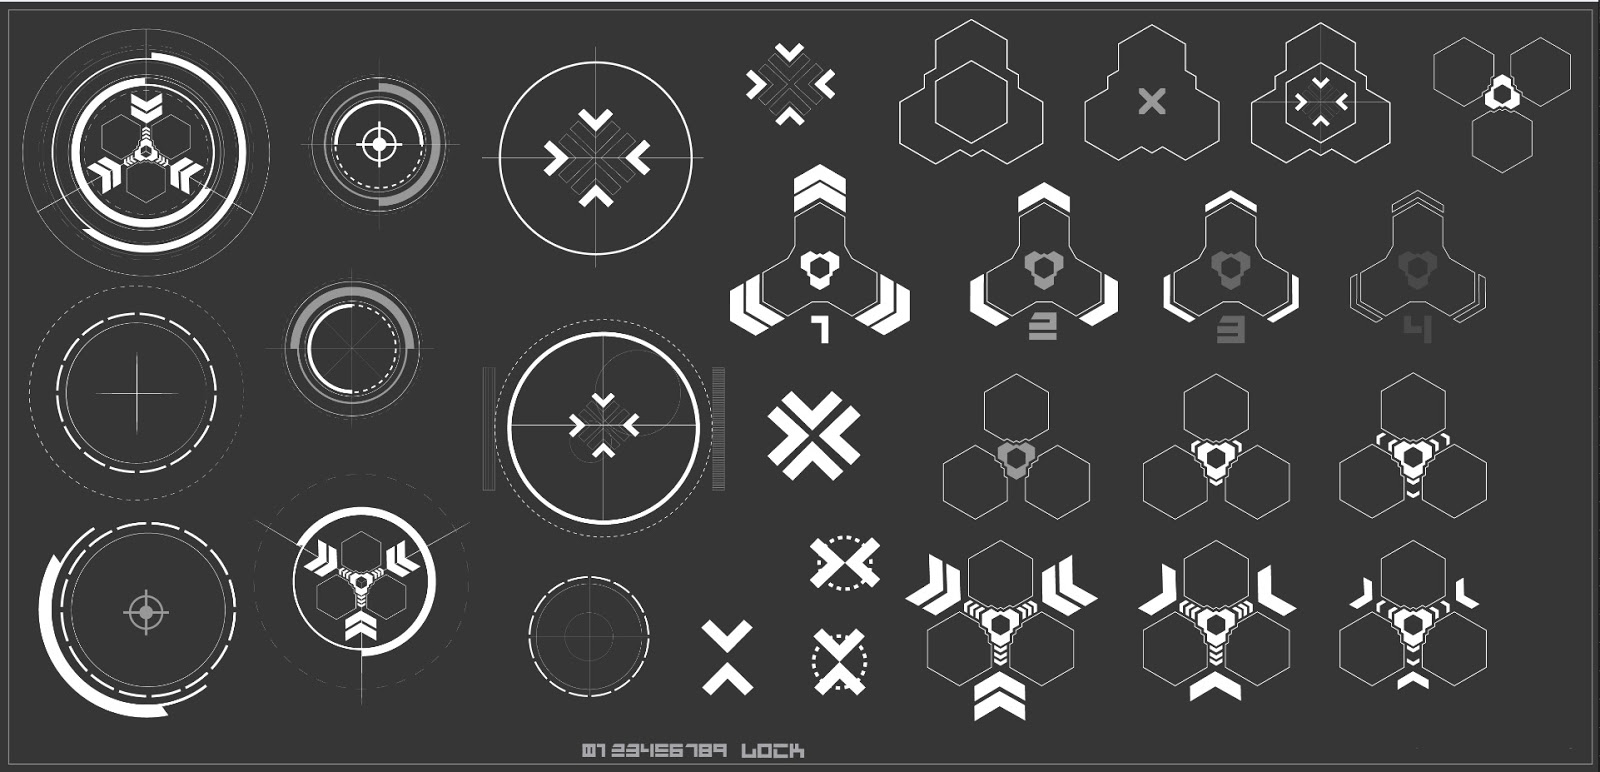 Download Heavy Vector: GUI Elements and Icongraphy Design